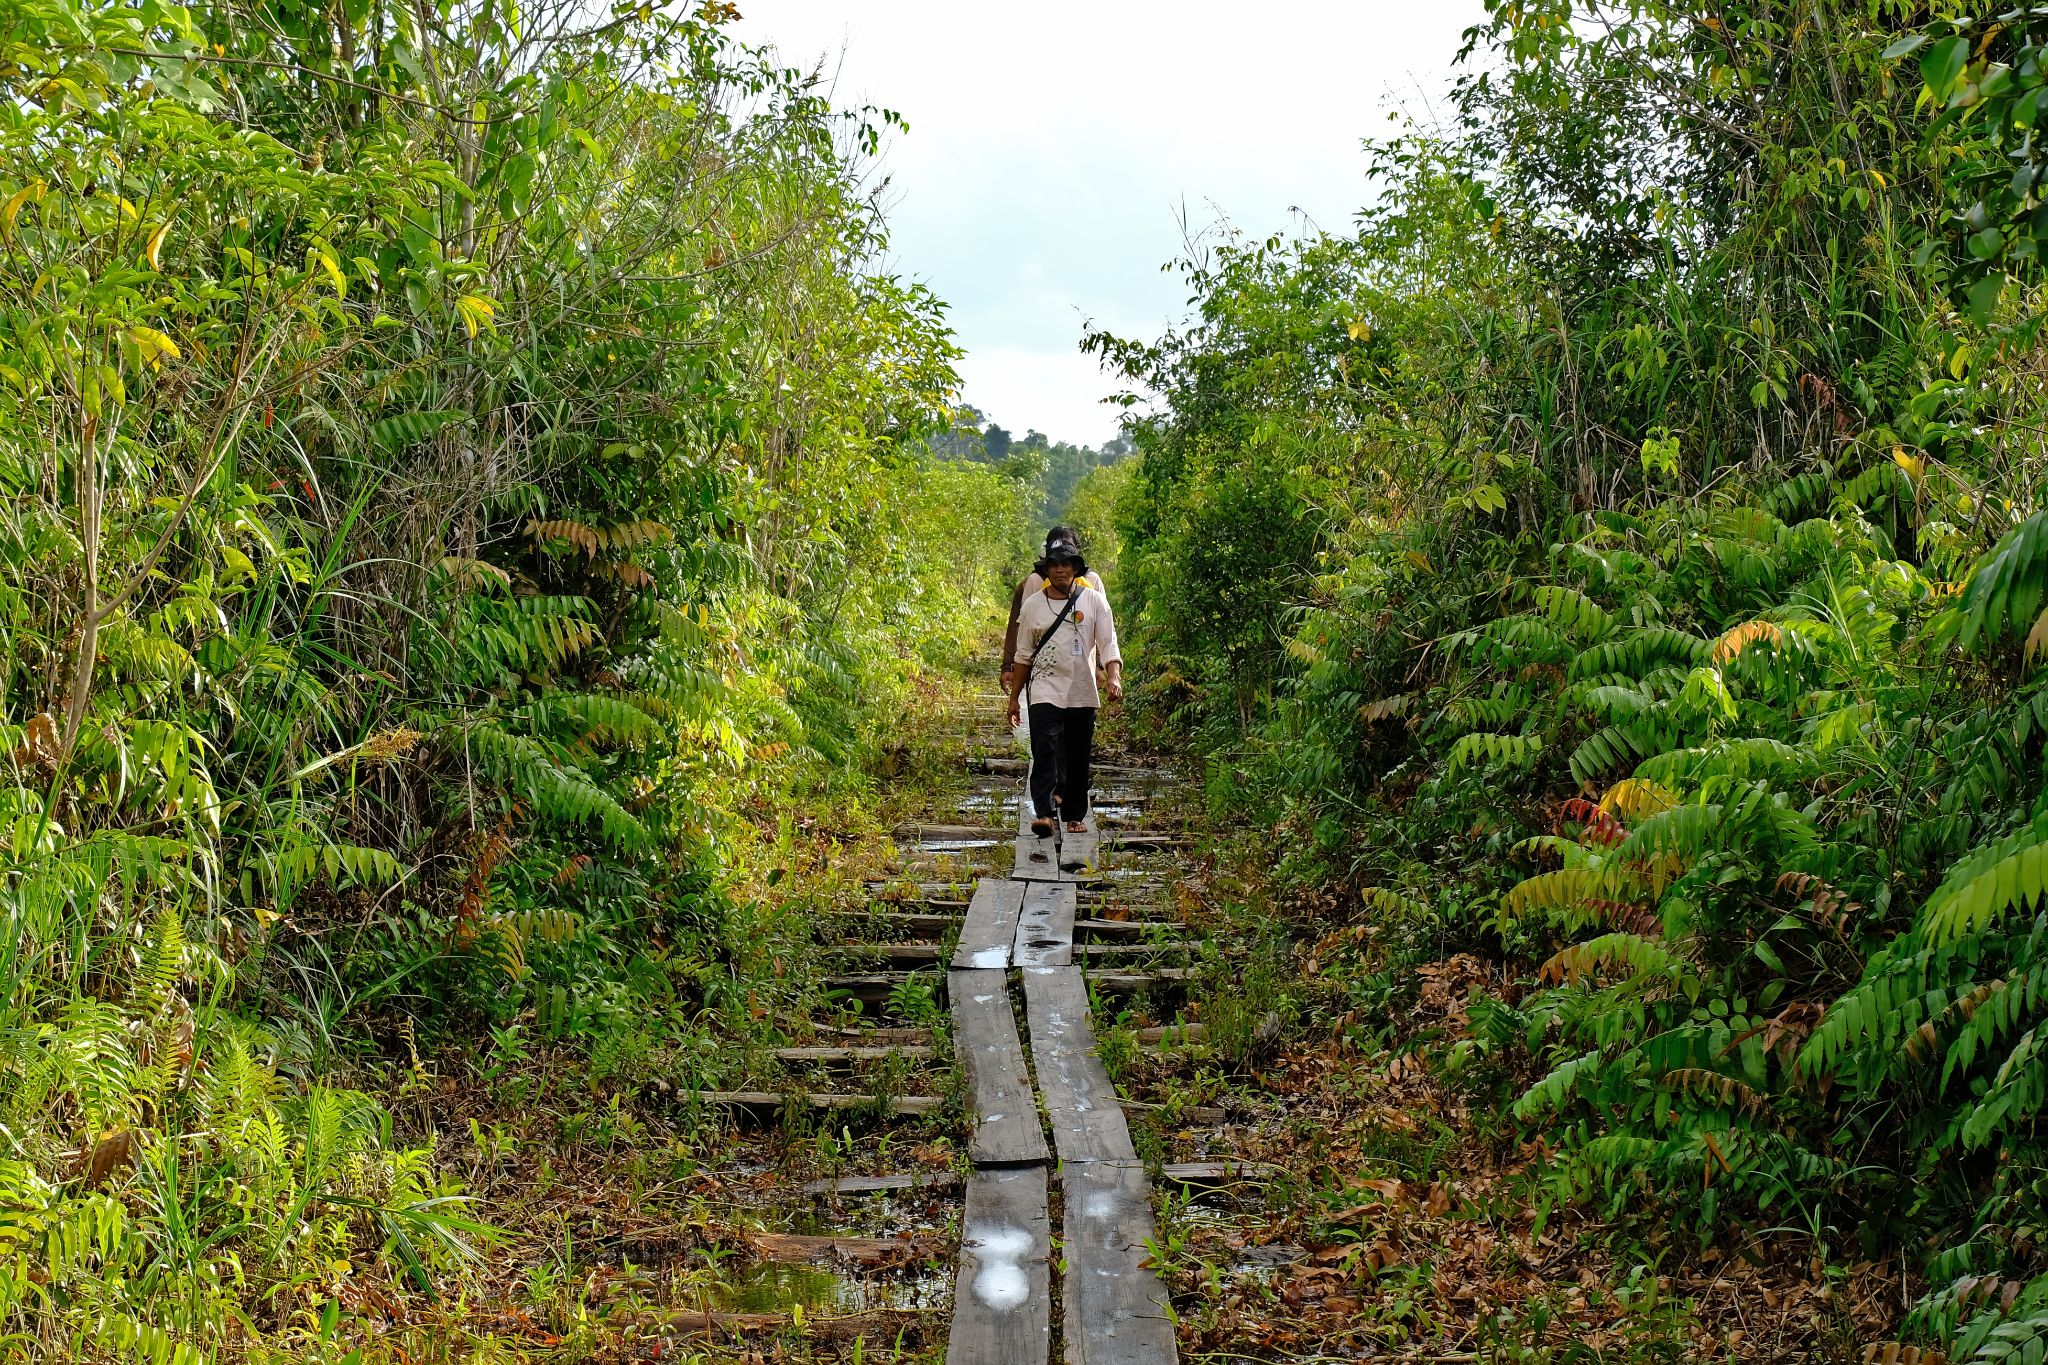 Two figures walk toward the camera down a wood-plank-lined path through a green, forest area.